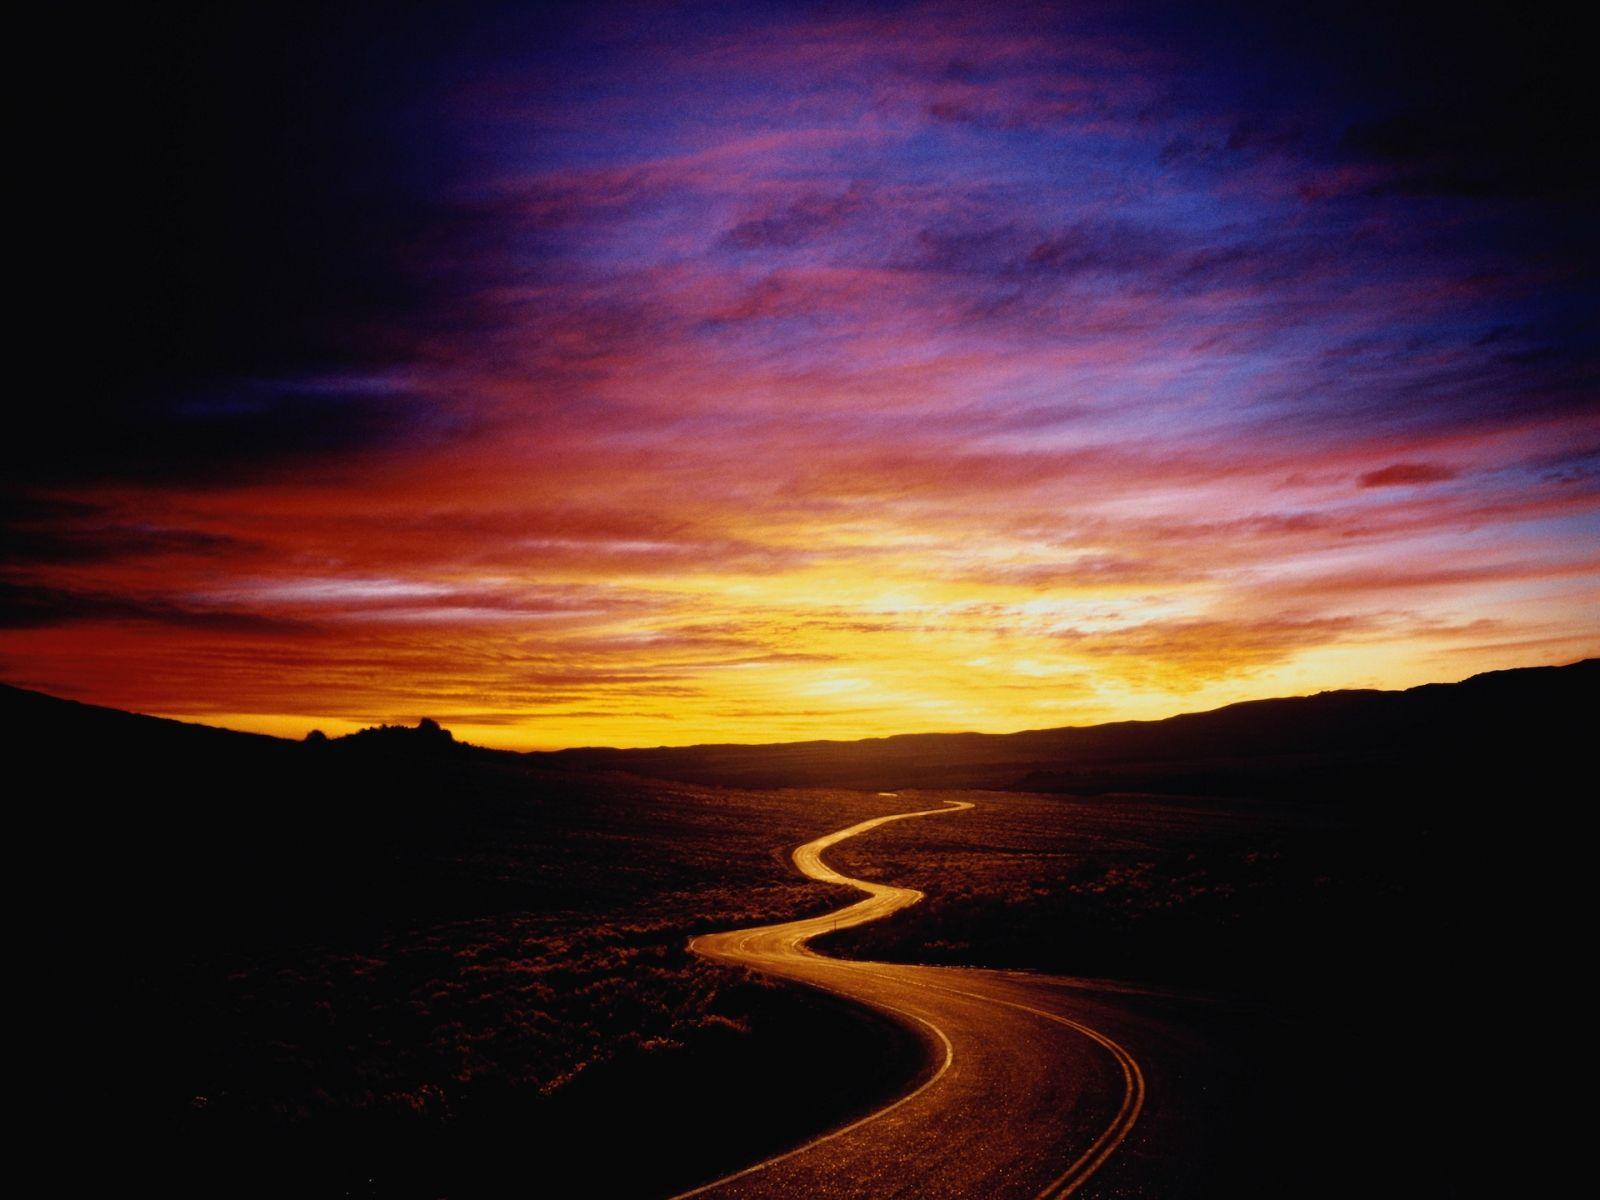 Winding road wallpaper and image, picture, photo